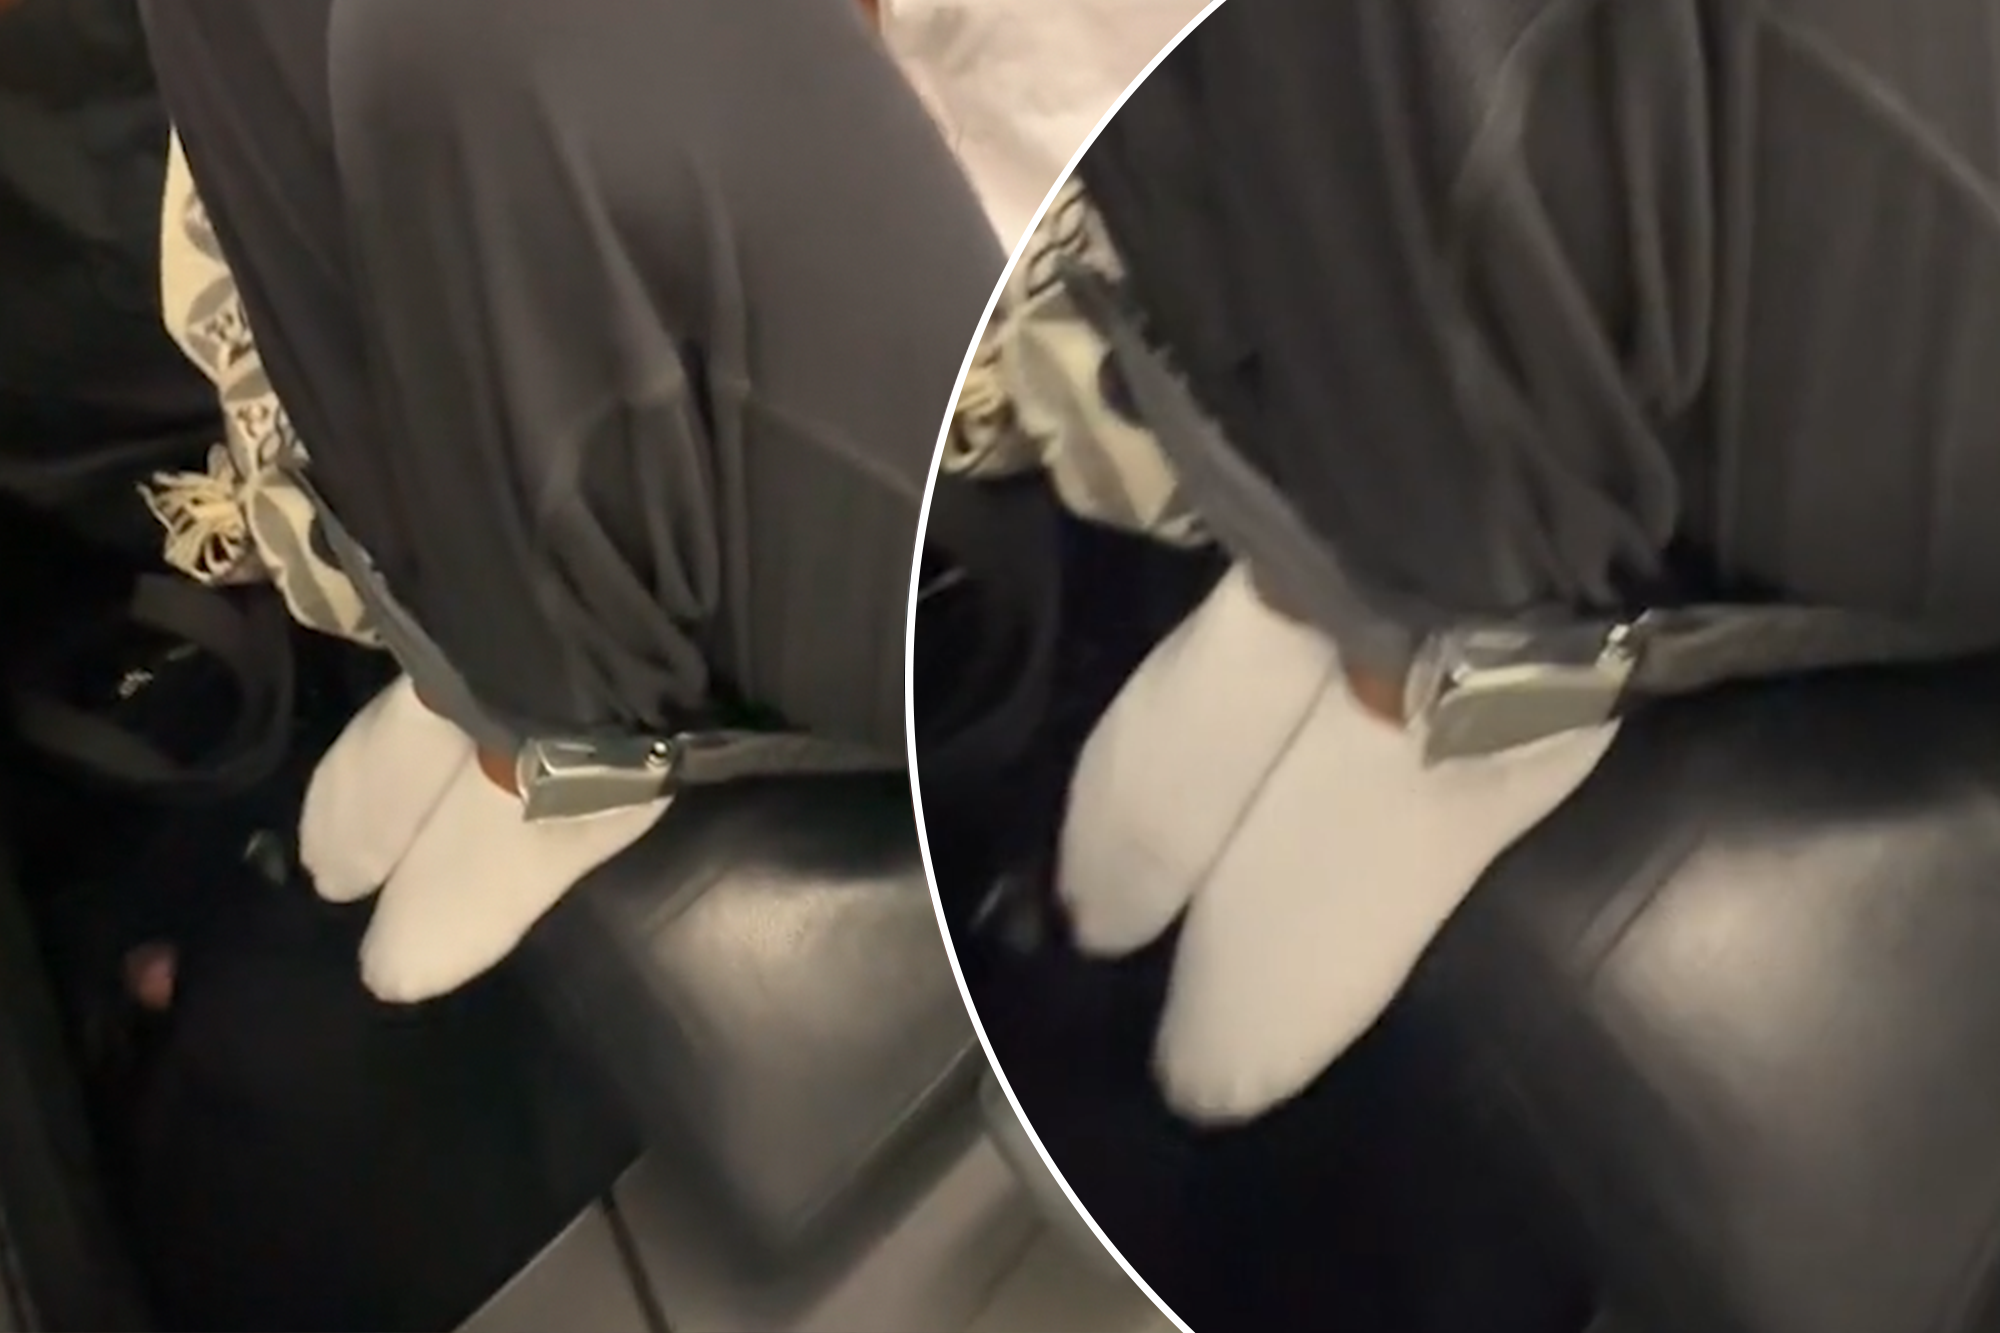 Travel experts are warning about the latest TikTok comfort hack for long flights